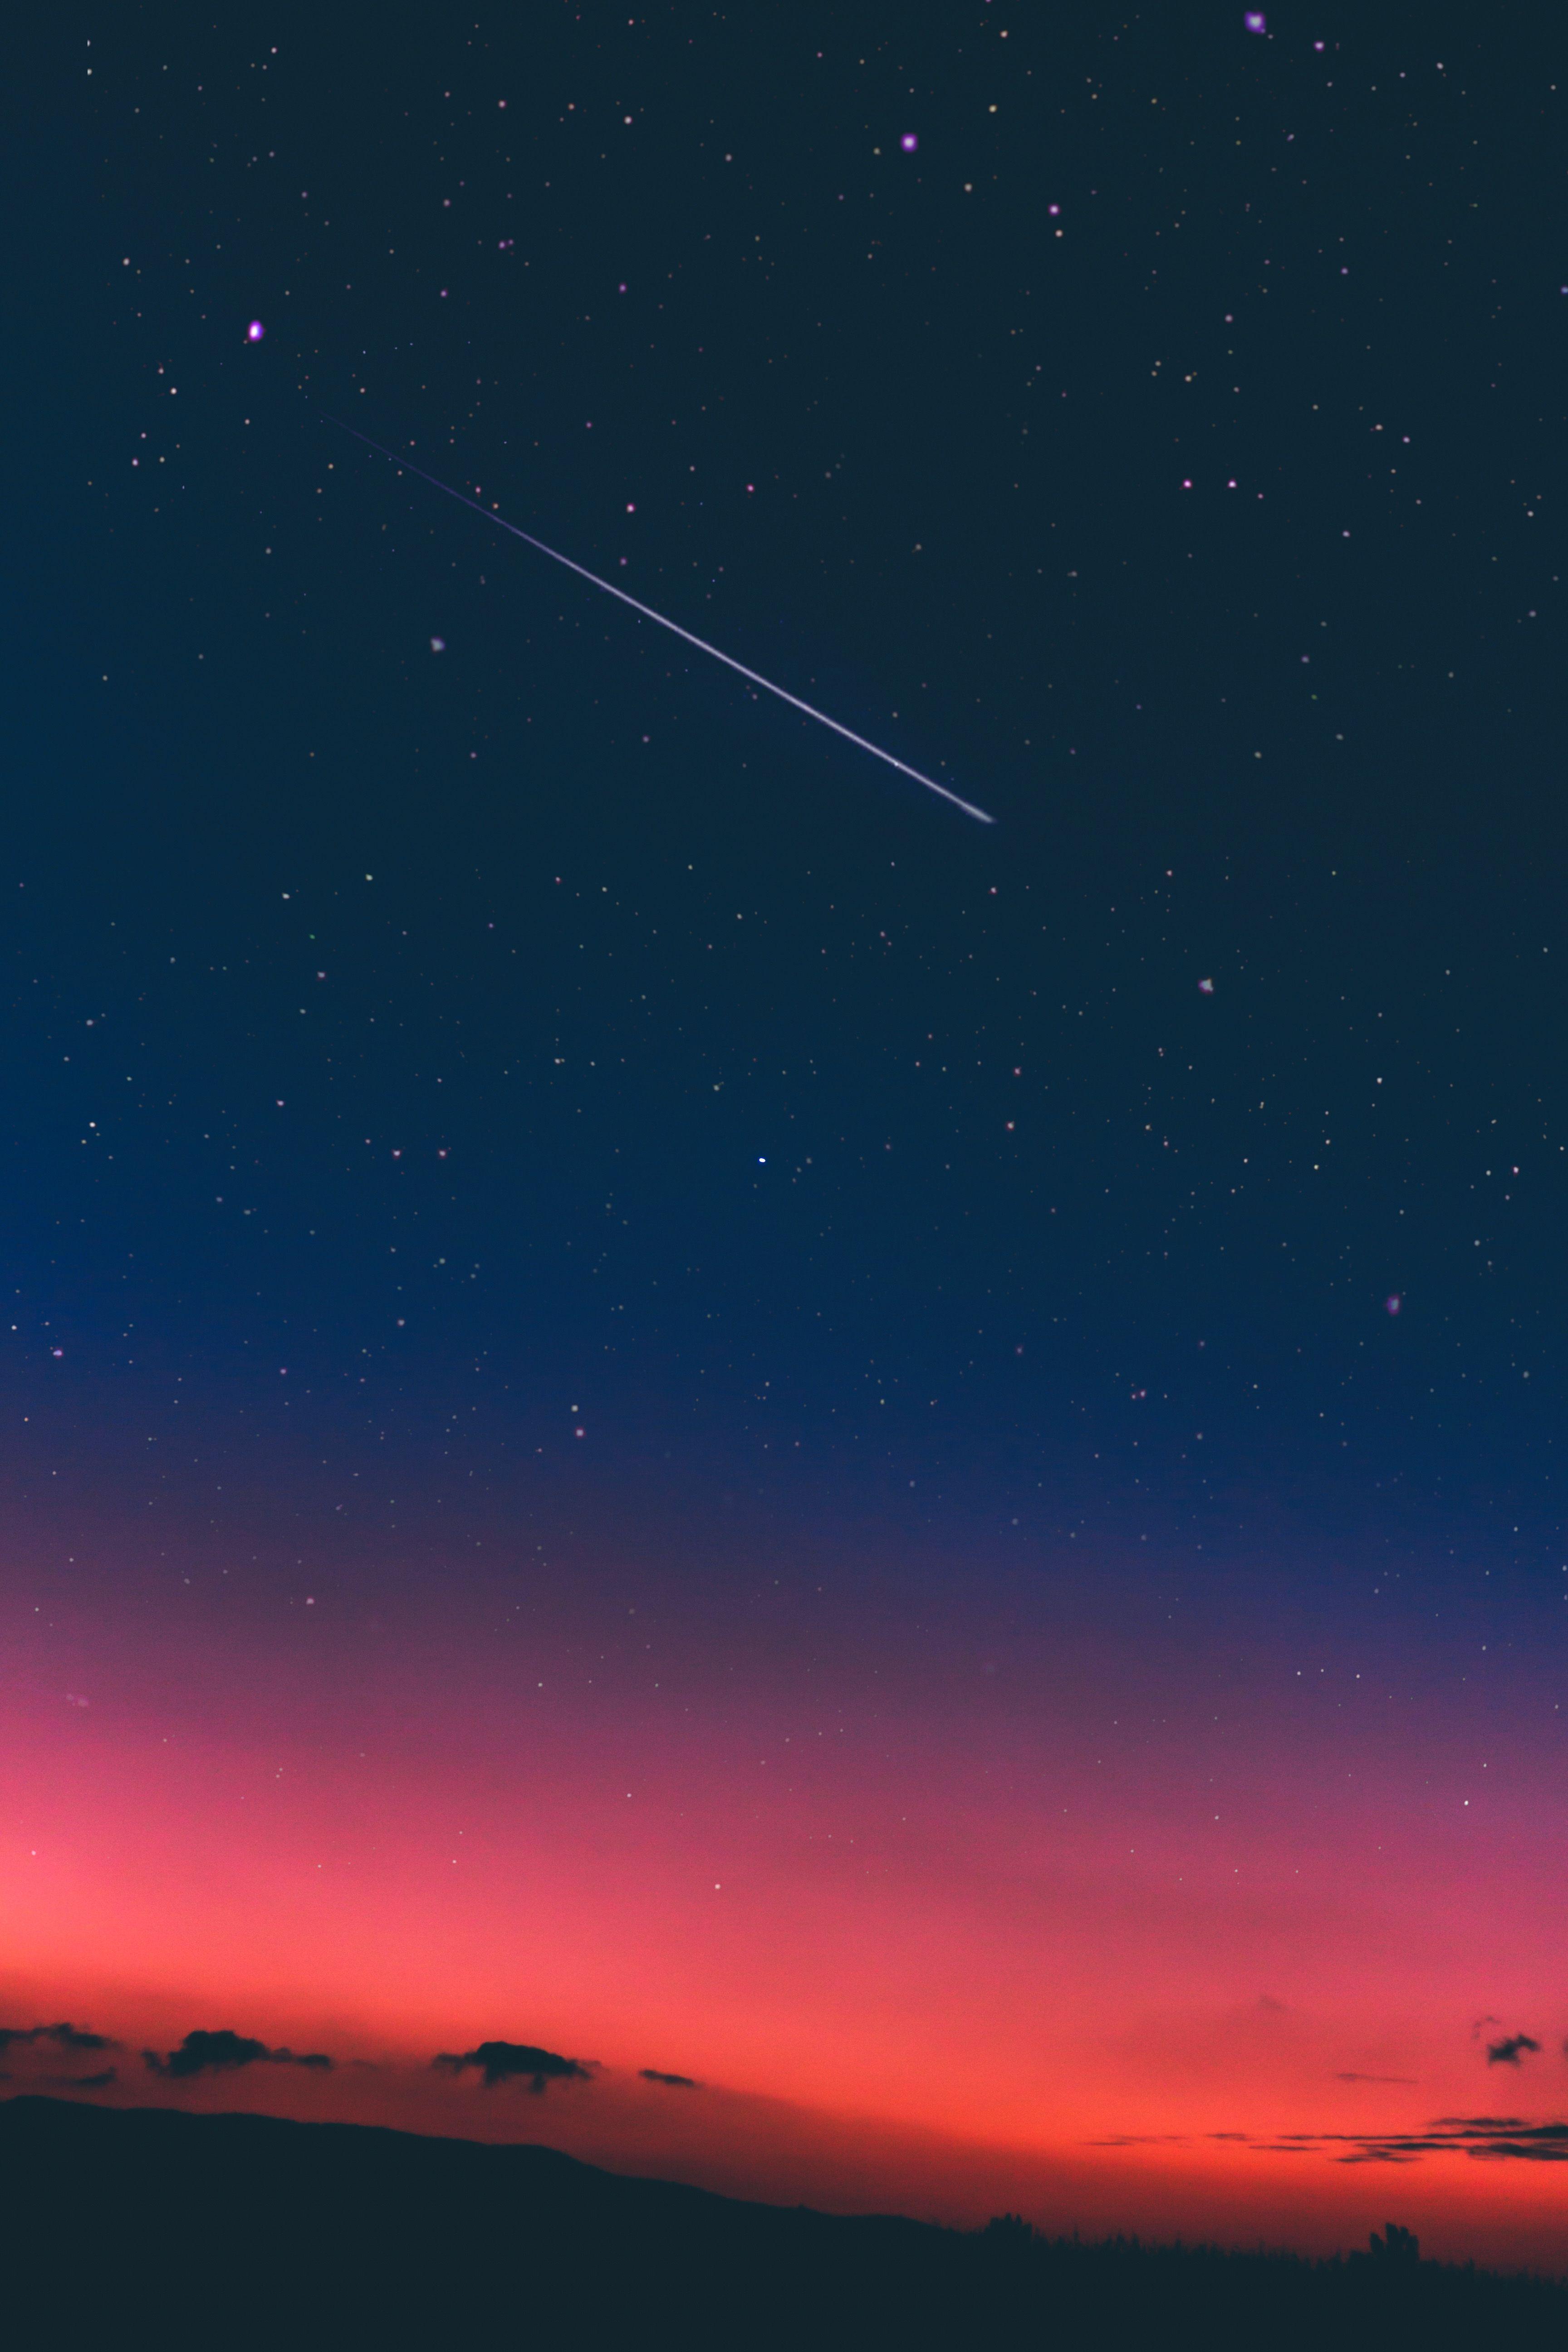 Night Sky with Shooting Star. TAGS: pink, blue, deep, sunset